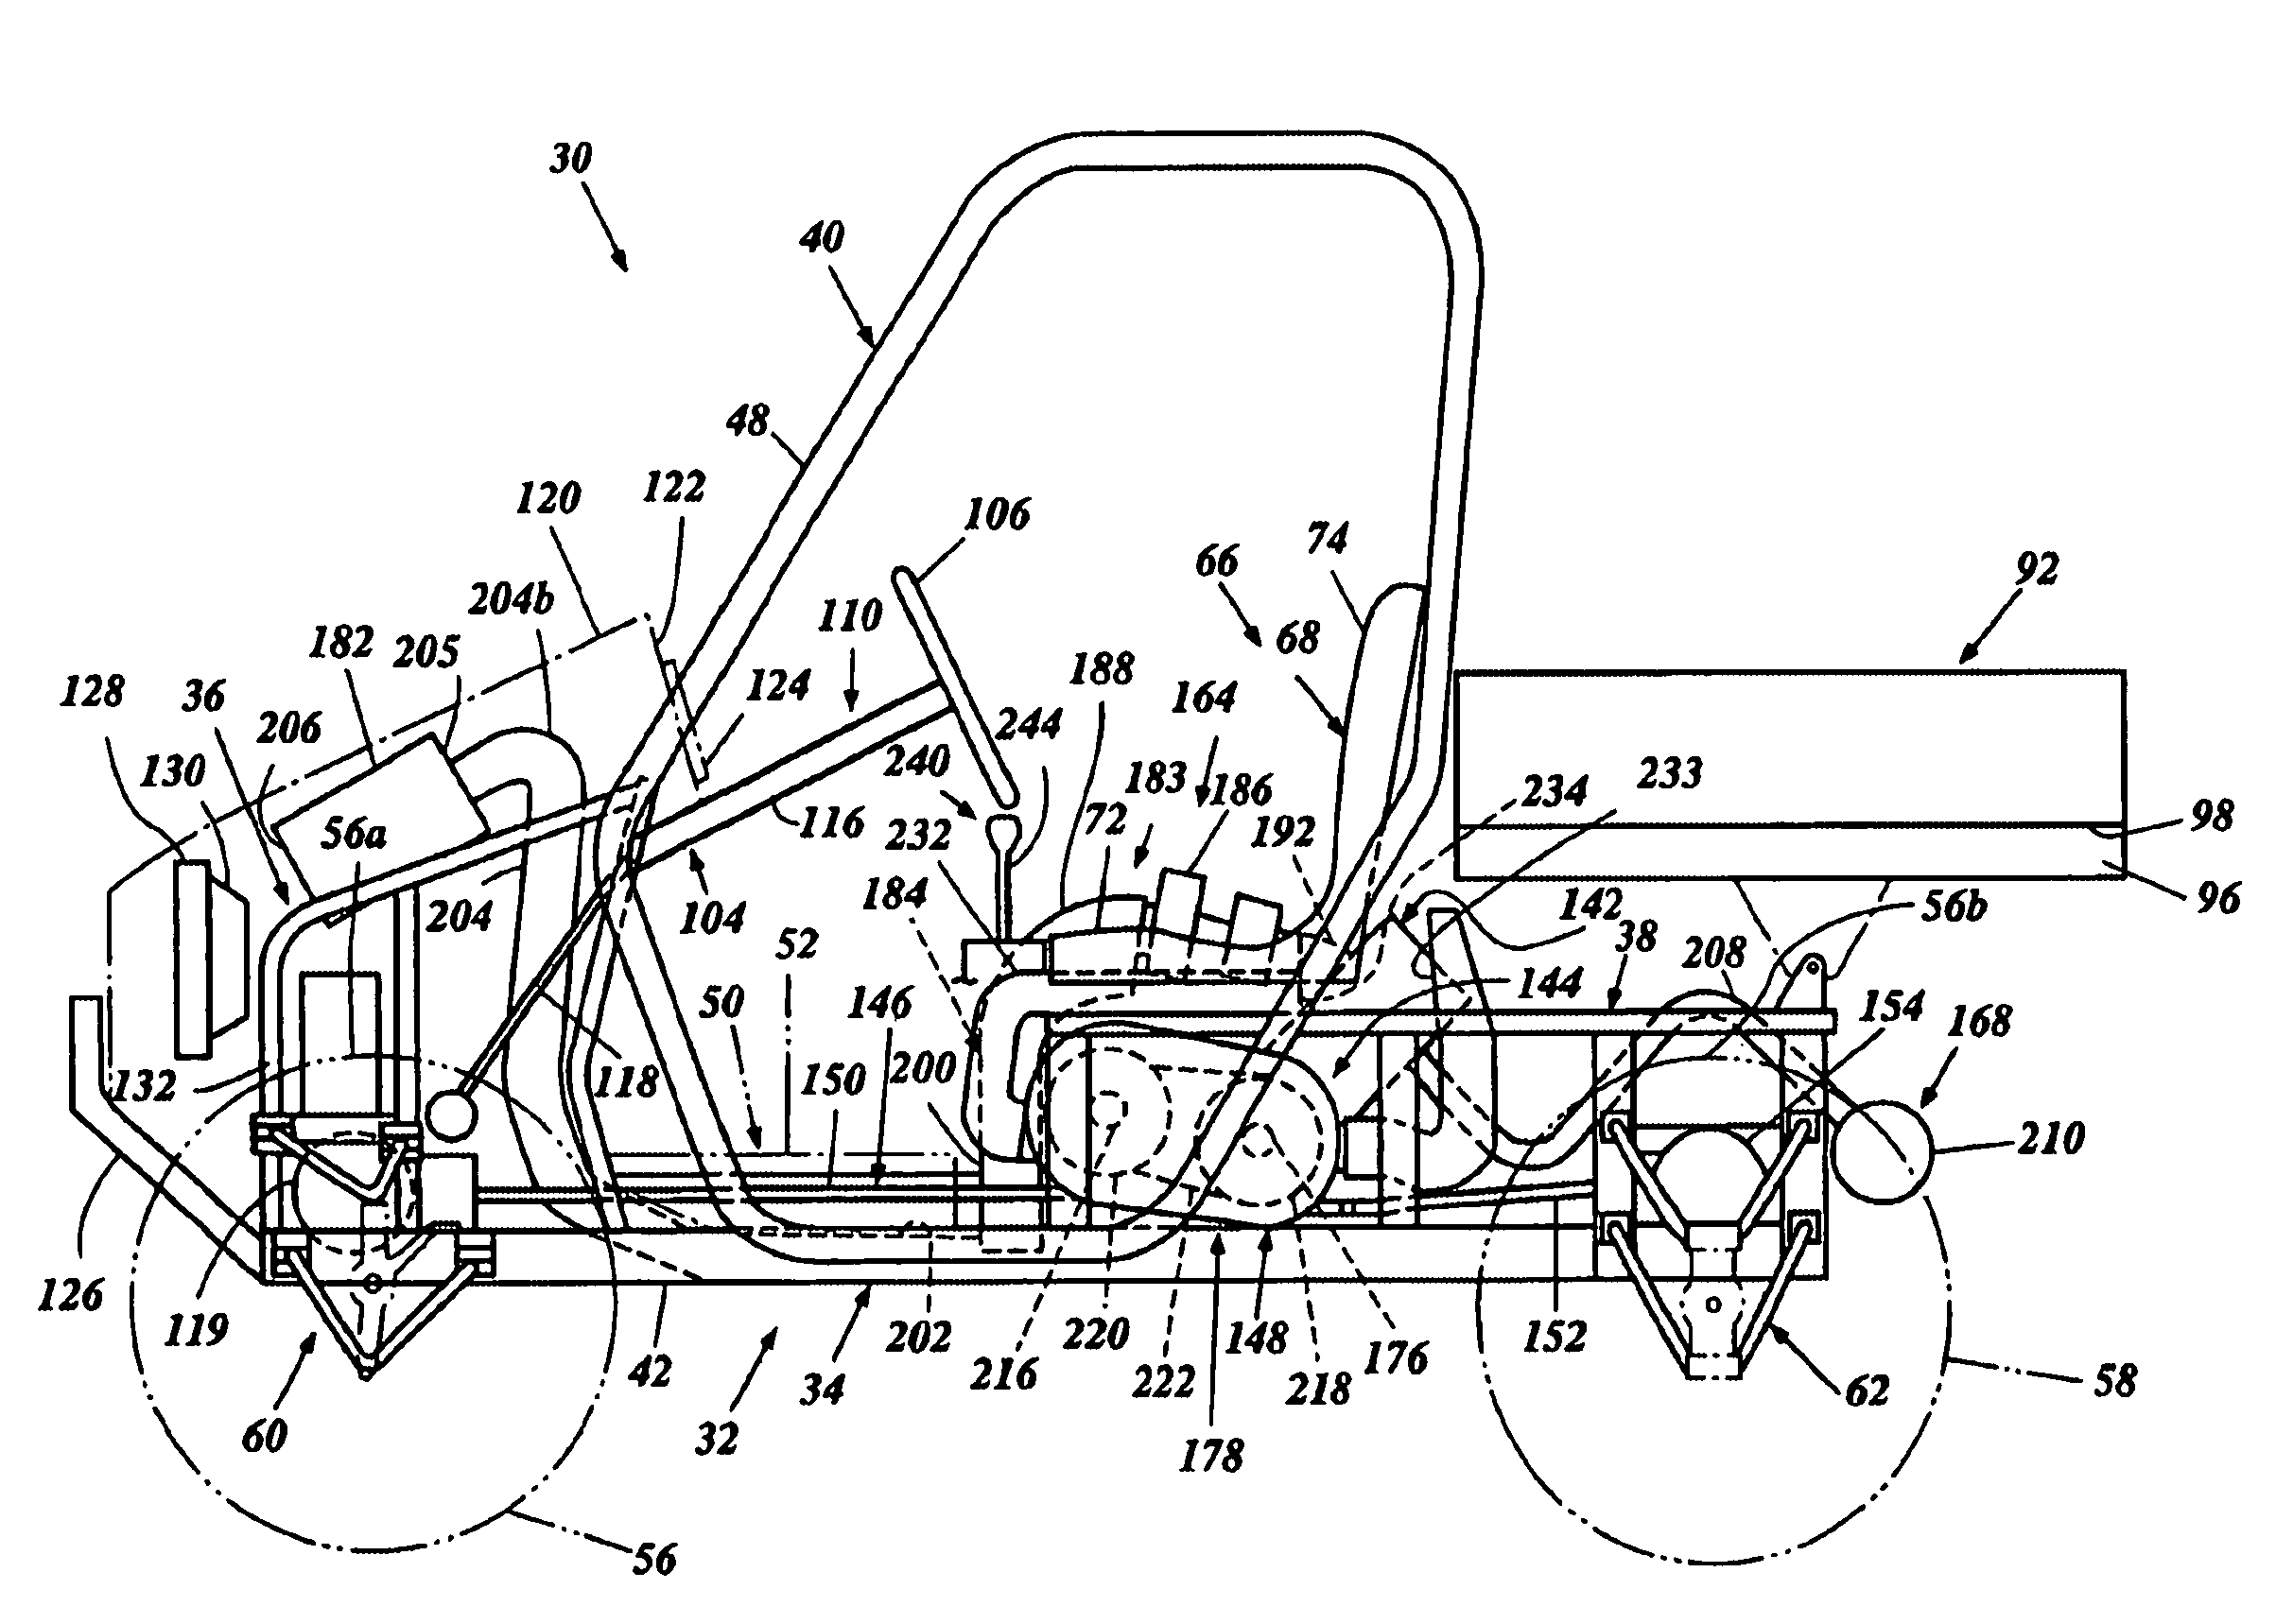 Off road vehicle with air intake system